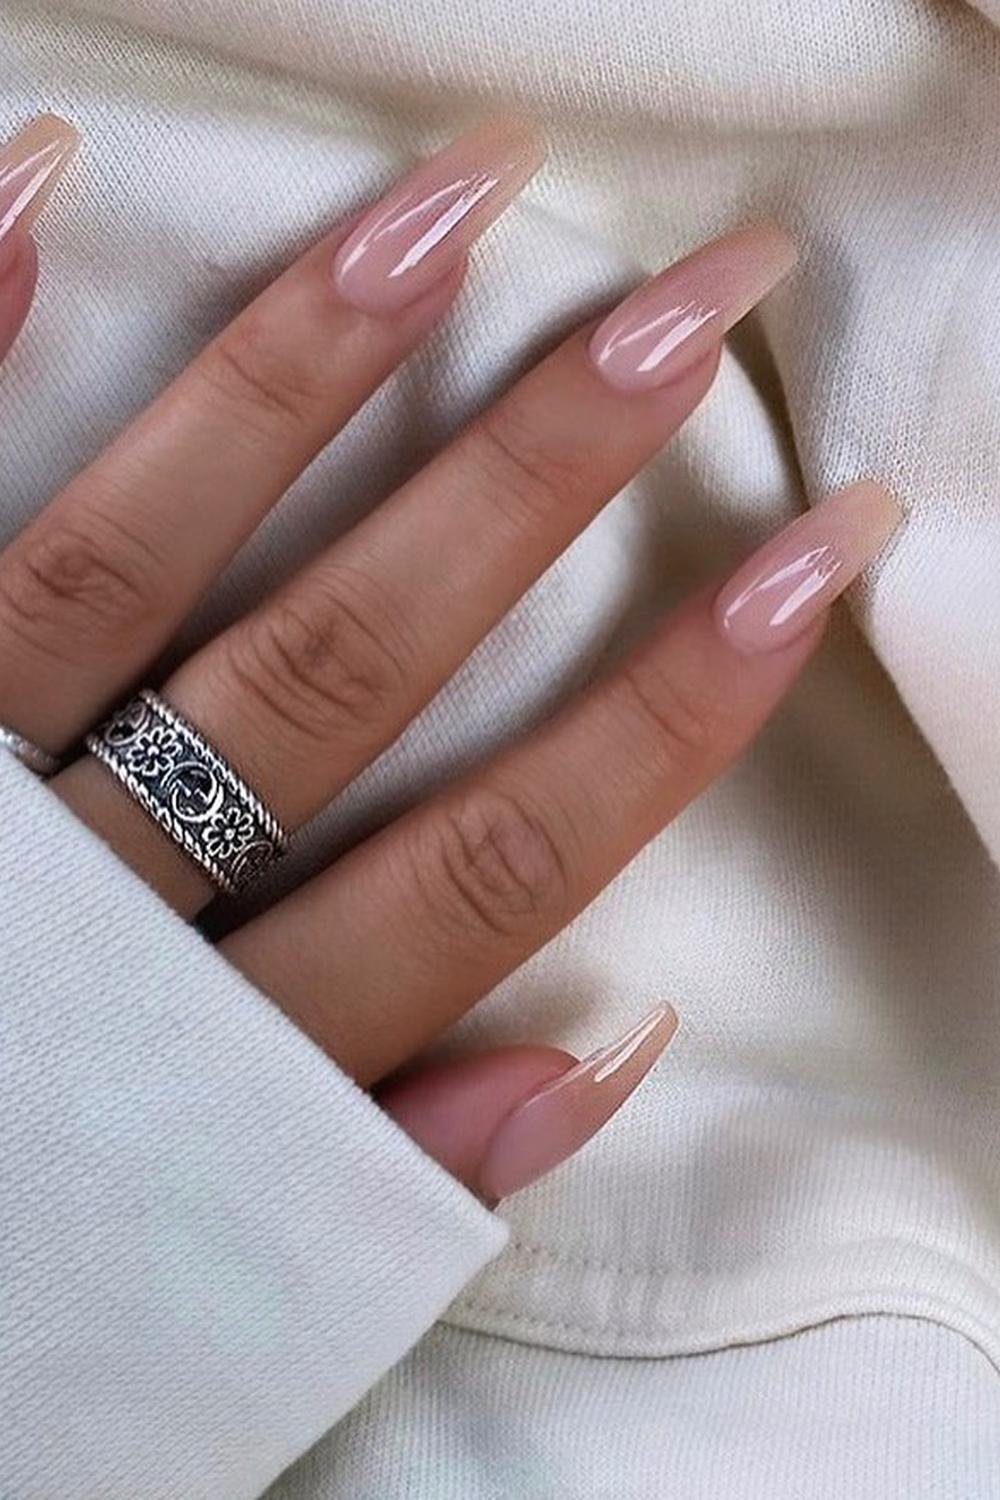 20 - Picture of Nude Nails